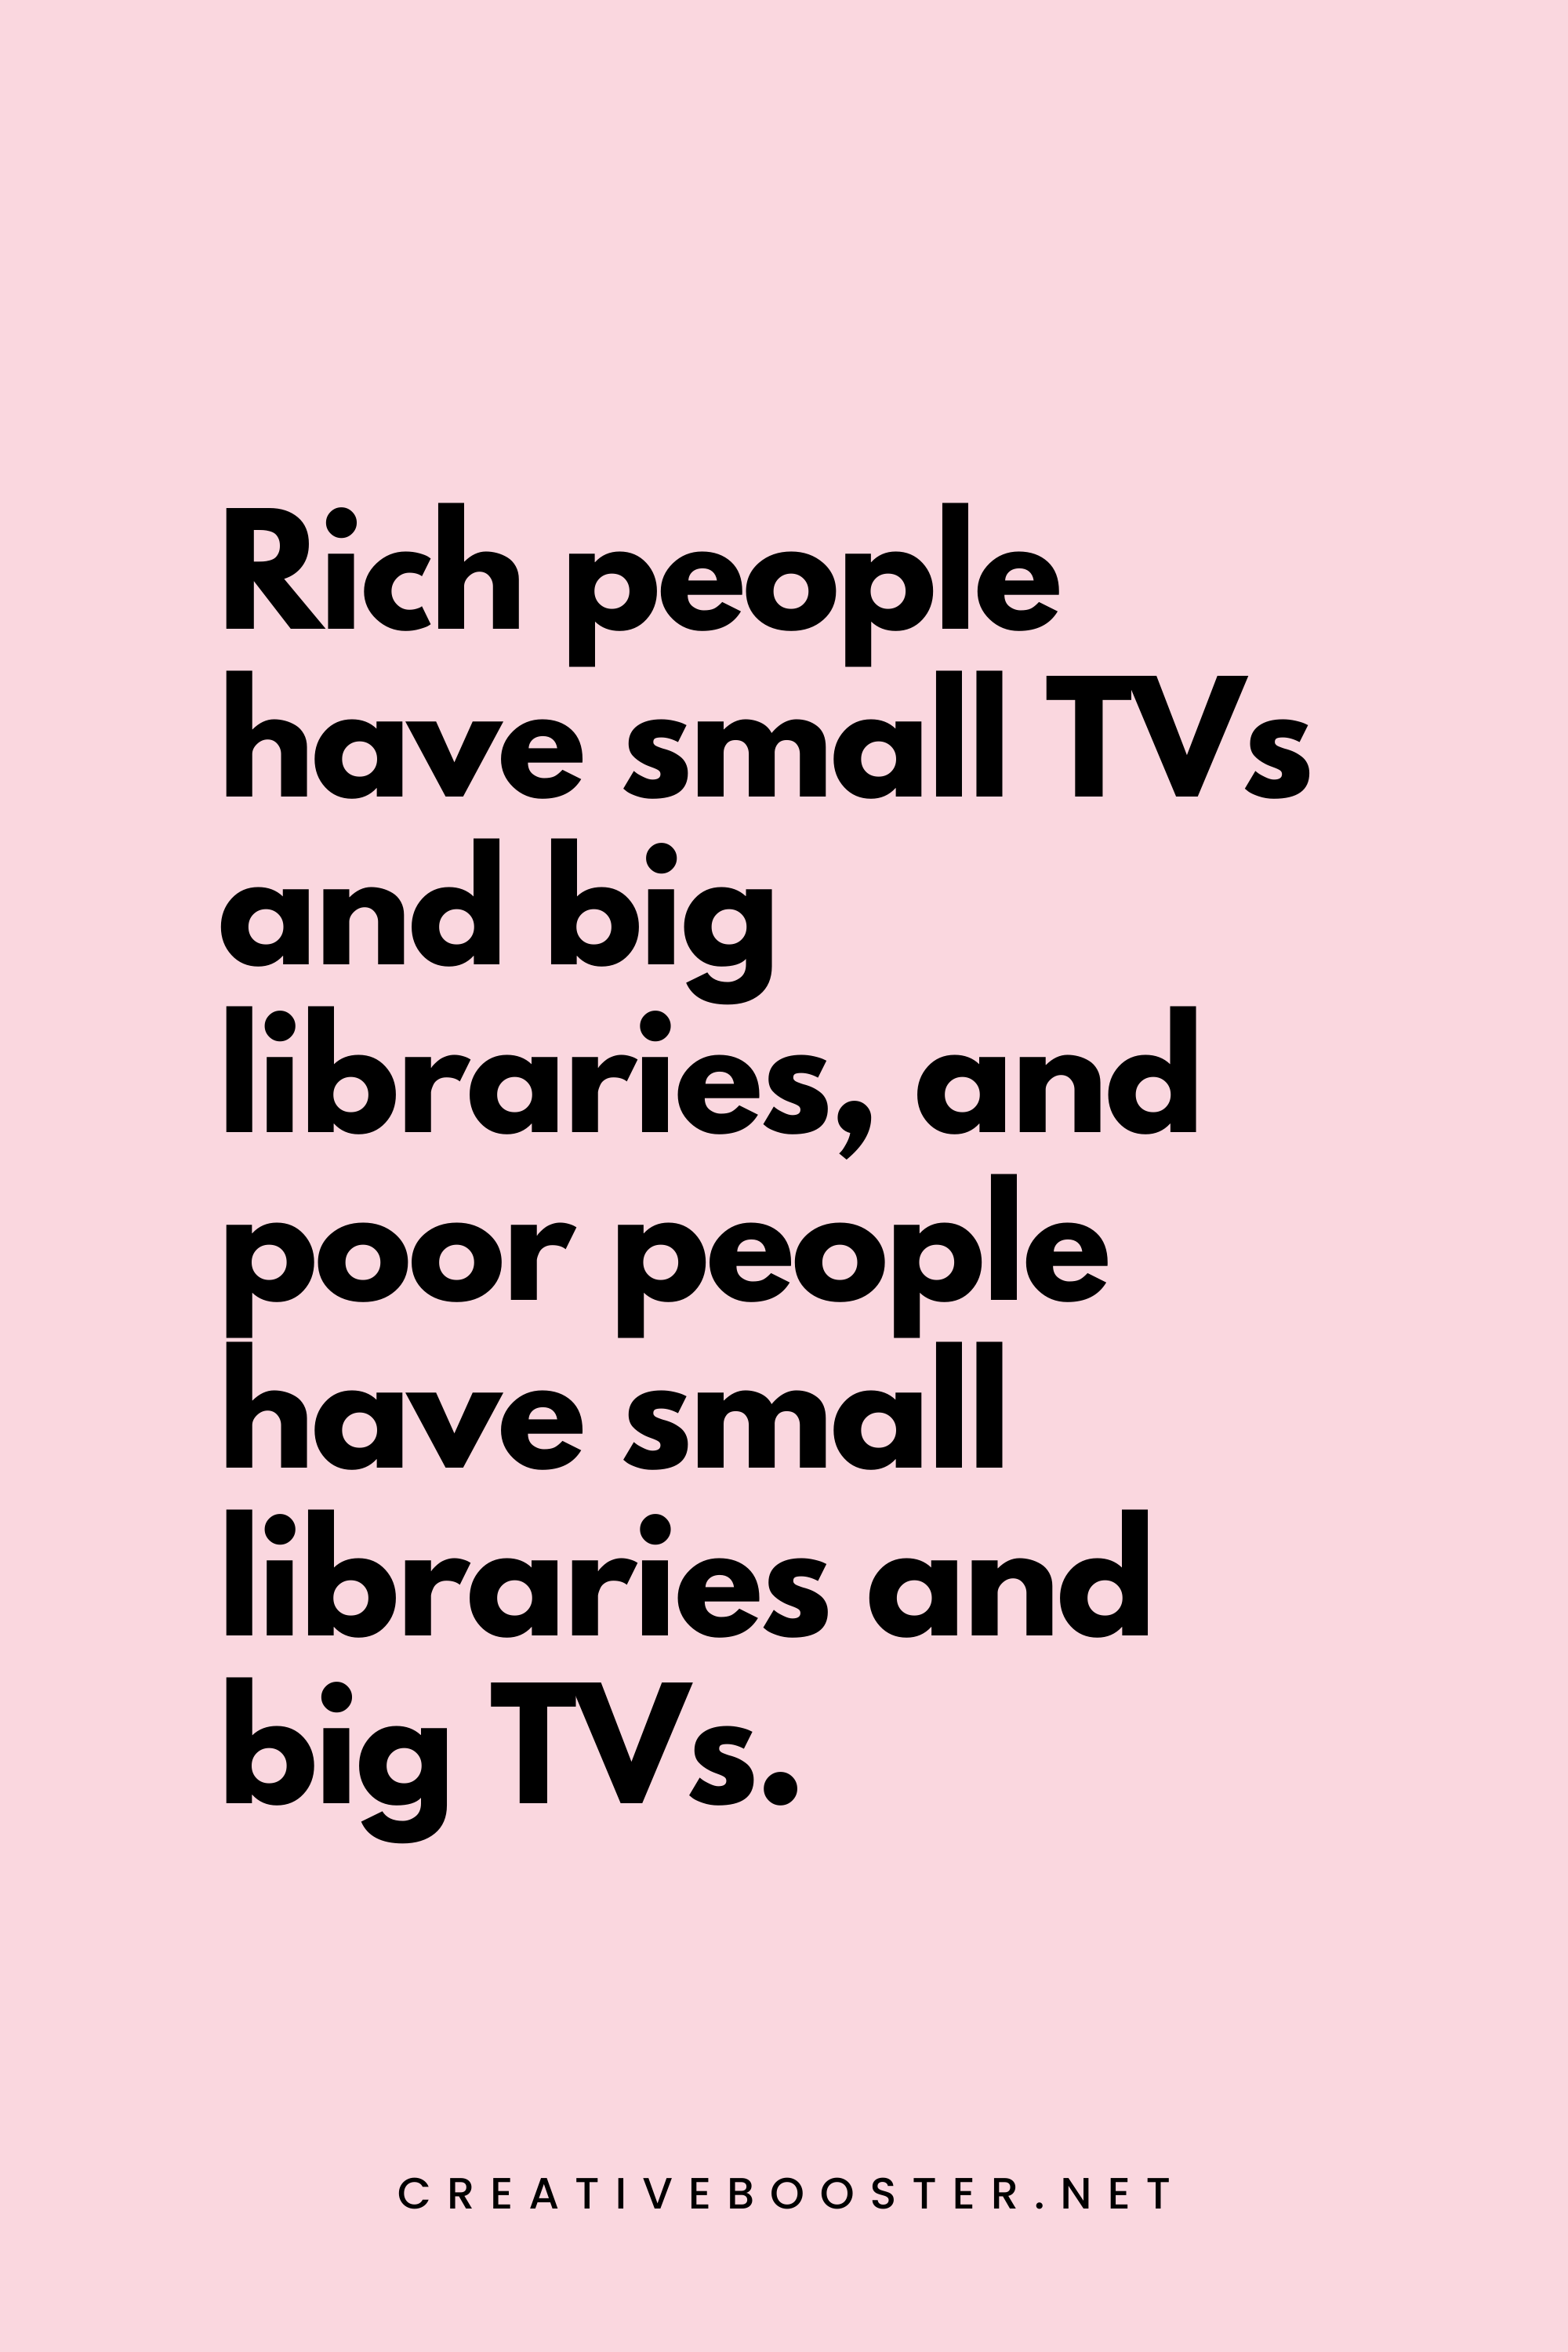 6. Rich people have small TVs and big libraries, and poor people have small libraries and big TVs. - Zig Ziglar - 1. Popular Financial Freedom Quotes